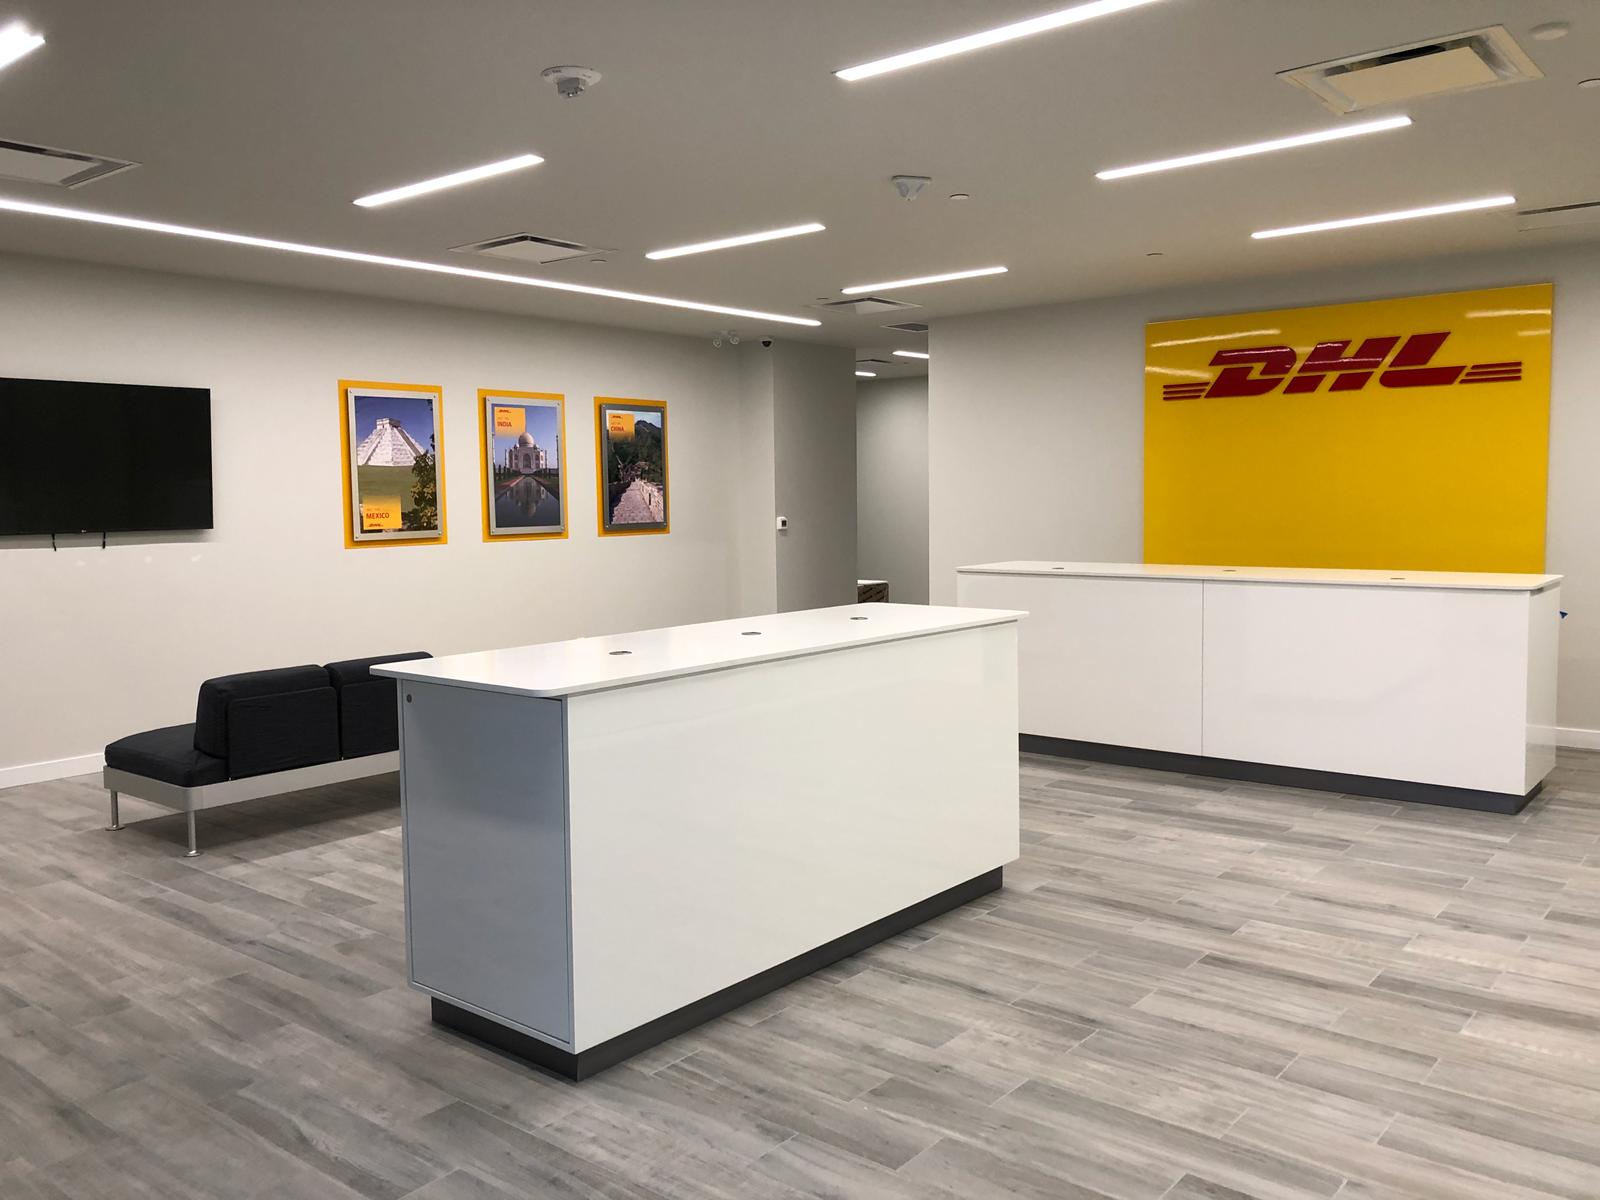 DHL in Calgary Alberta Retail Interior Design Front Of Store by Cutler